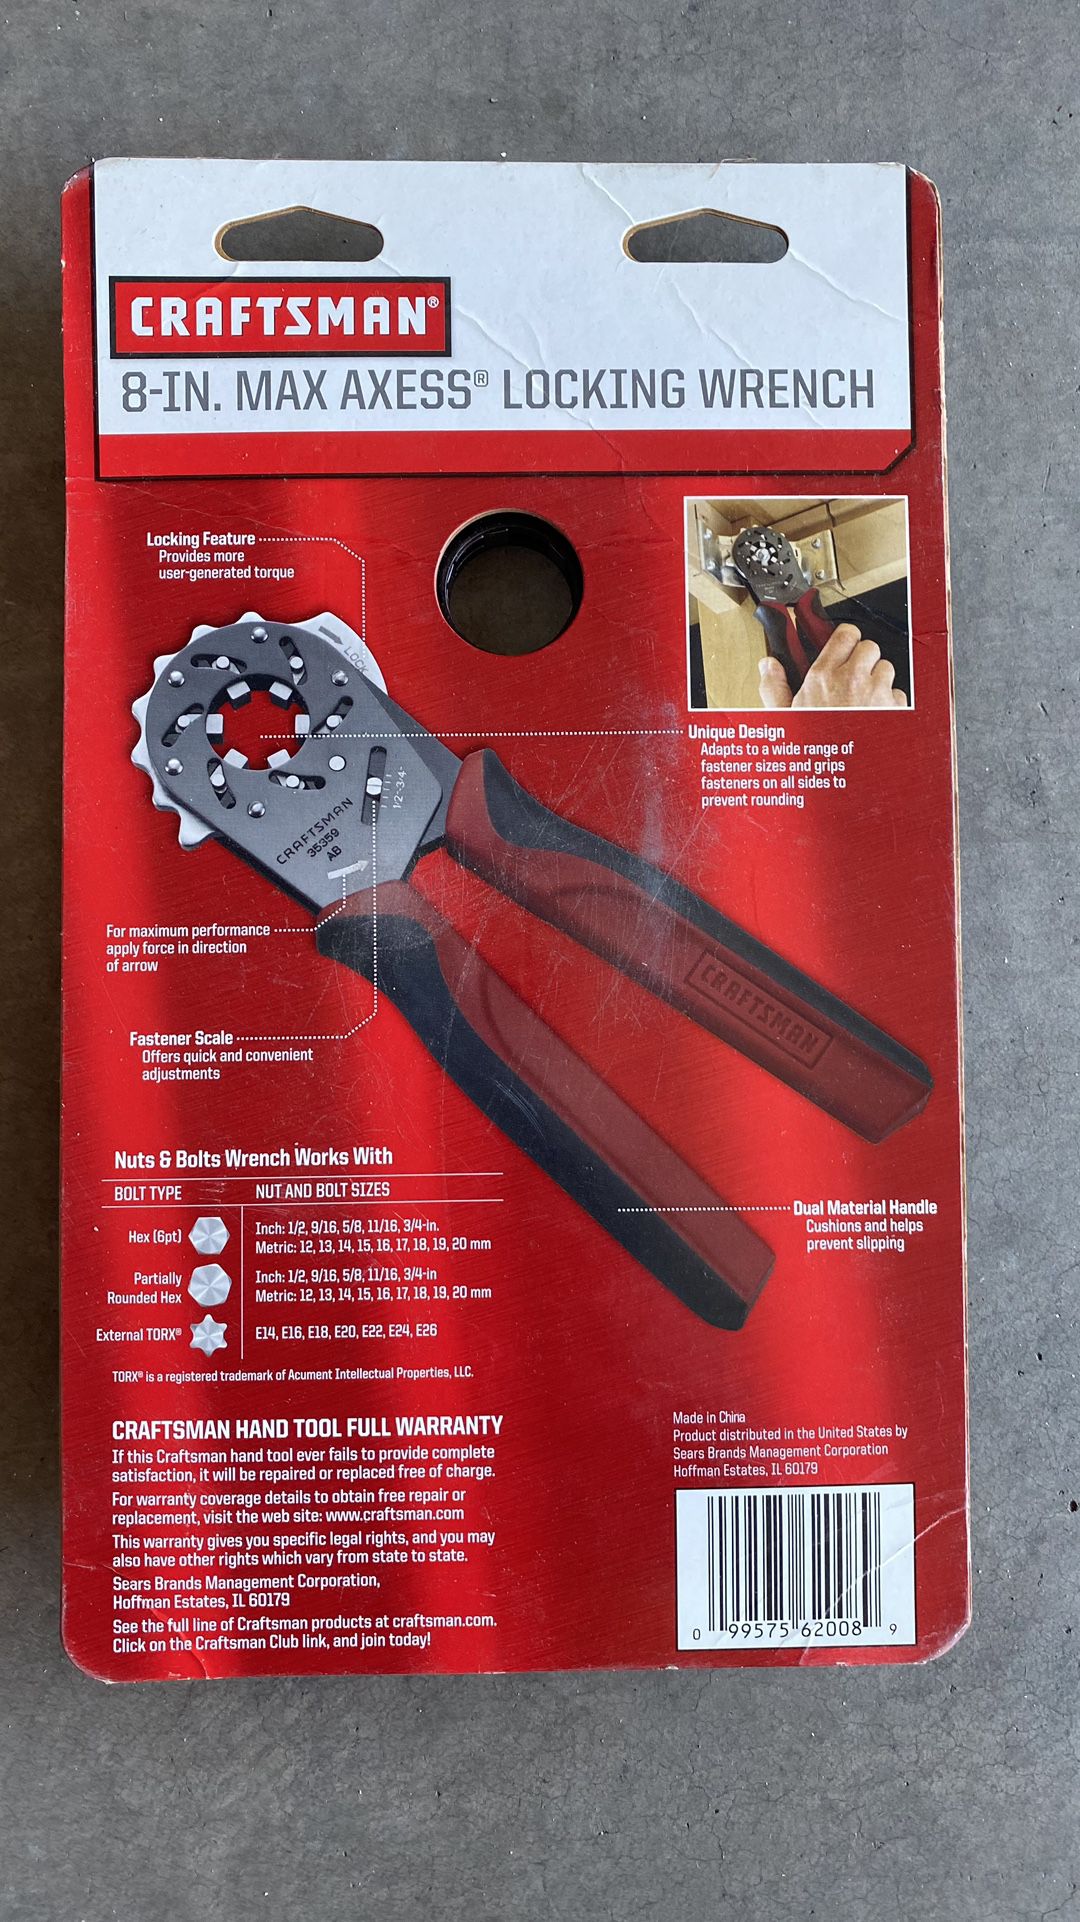 CRAFTSMAN 8-IN. MAX AXESS® LOCKING WRENCH